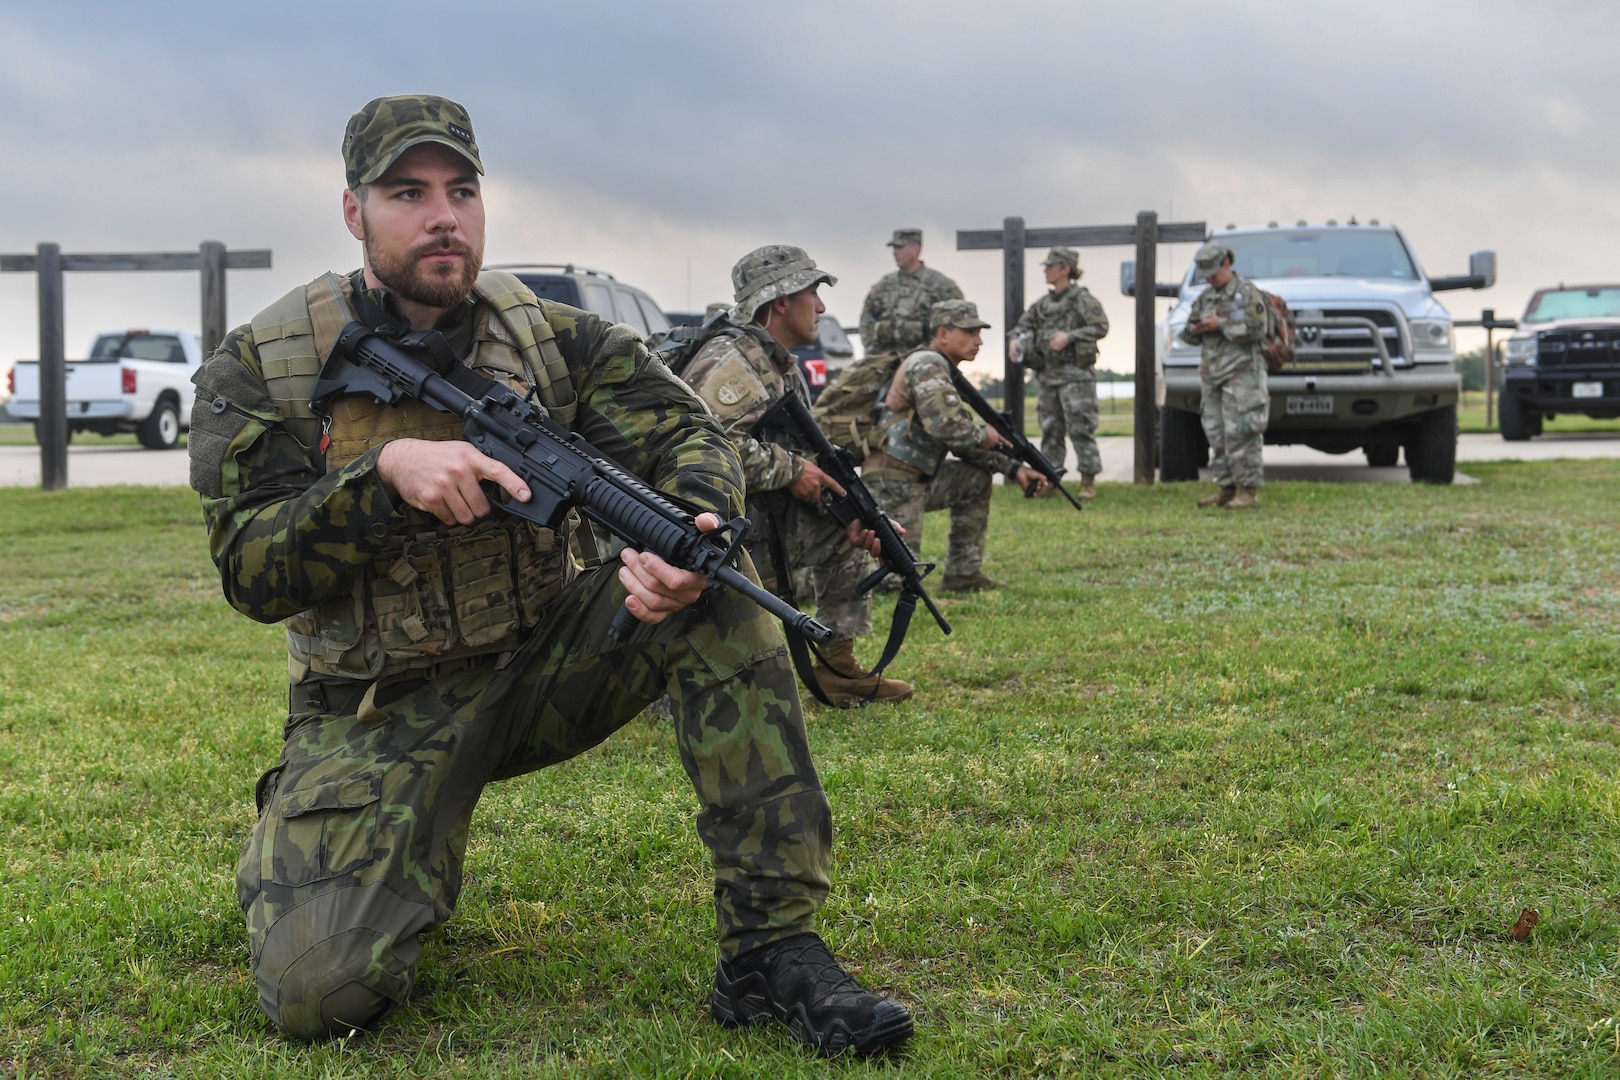 Staff Sgt. Maxim Mojzis, Czech army, kneels alongside Chilean armed forces in preparation for the M-4 qualifying event during the Texas Military Department Best Warrior Competition at Camp Swift, Texas, March 31, 2023. The friendly, six-day competition challenged service members on professional military knowledge, marksmanship, obstacle course and land navigation.